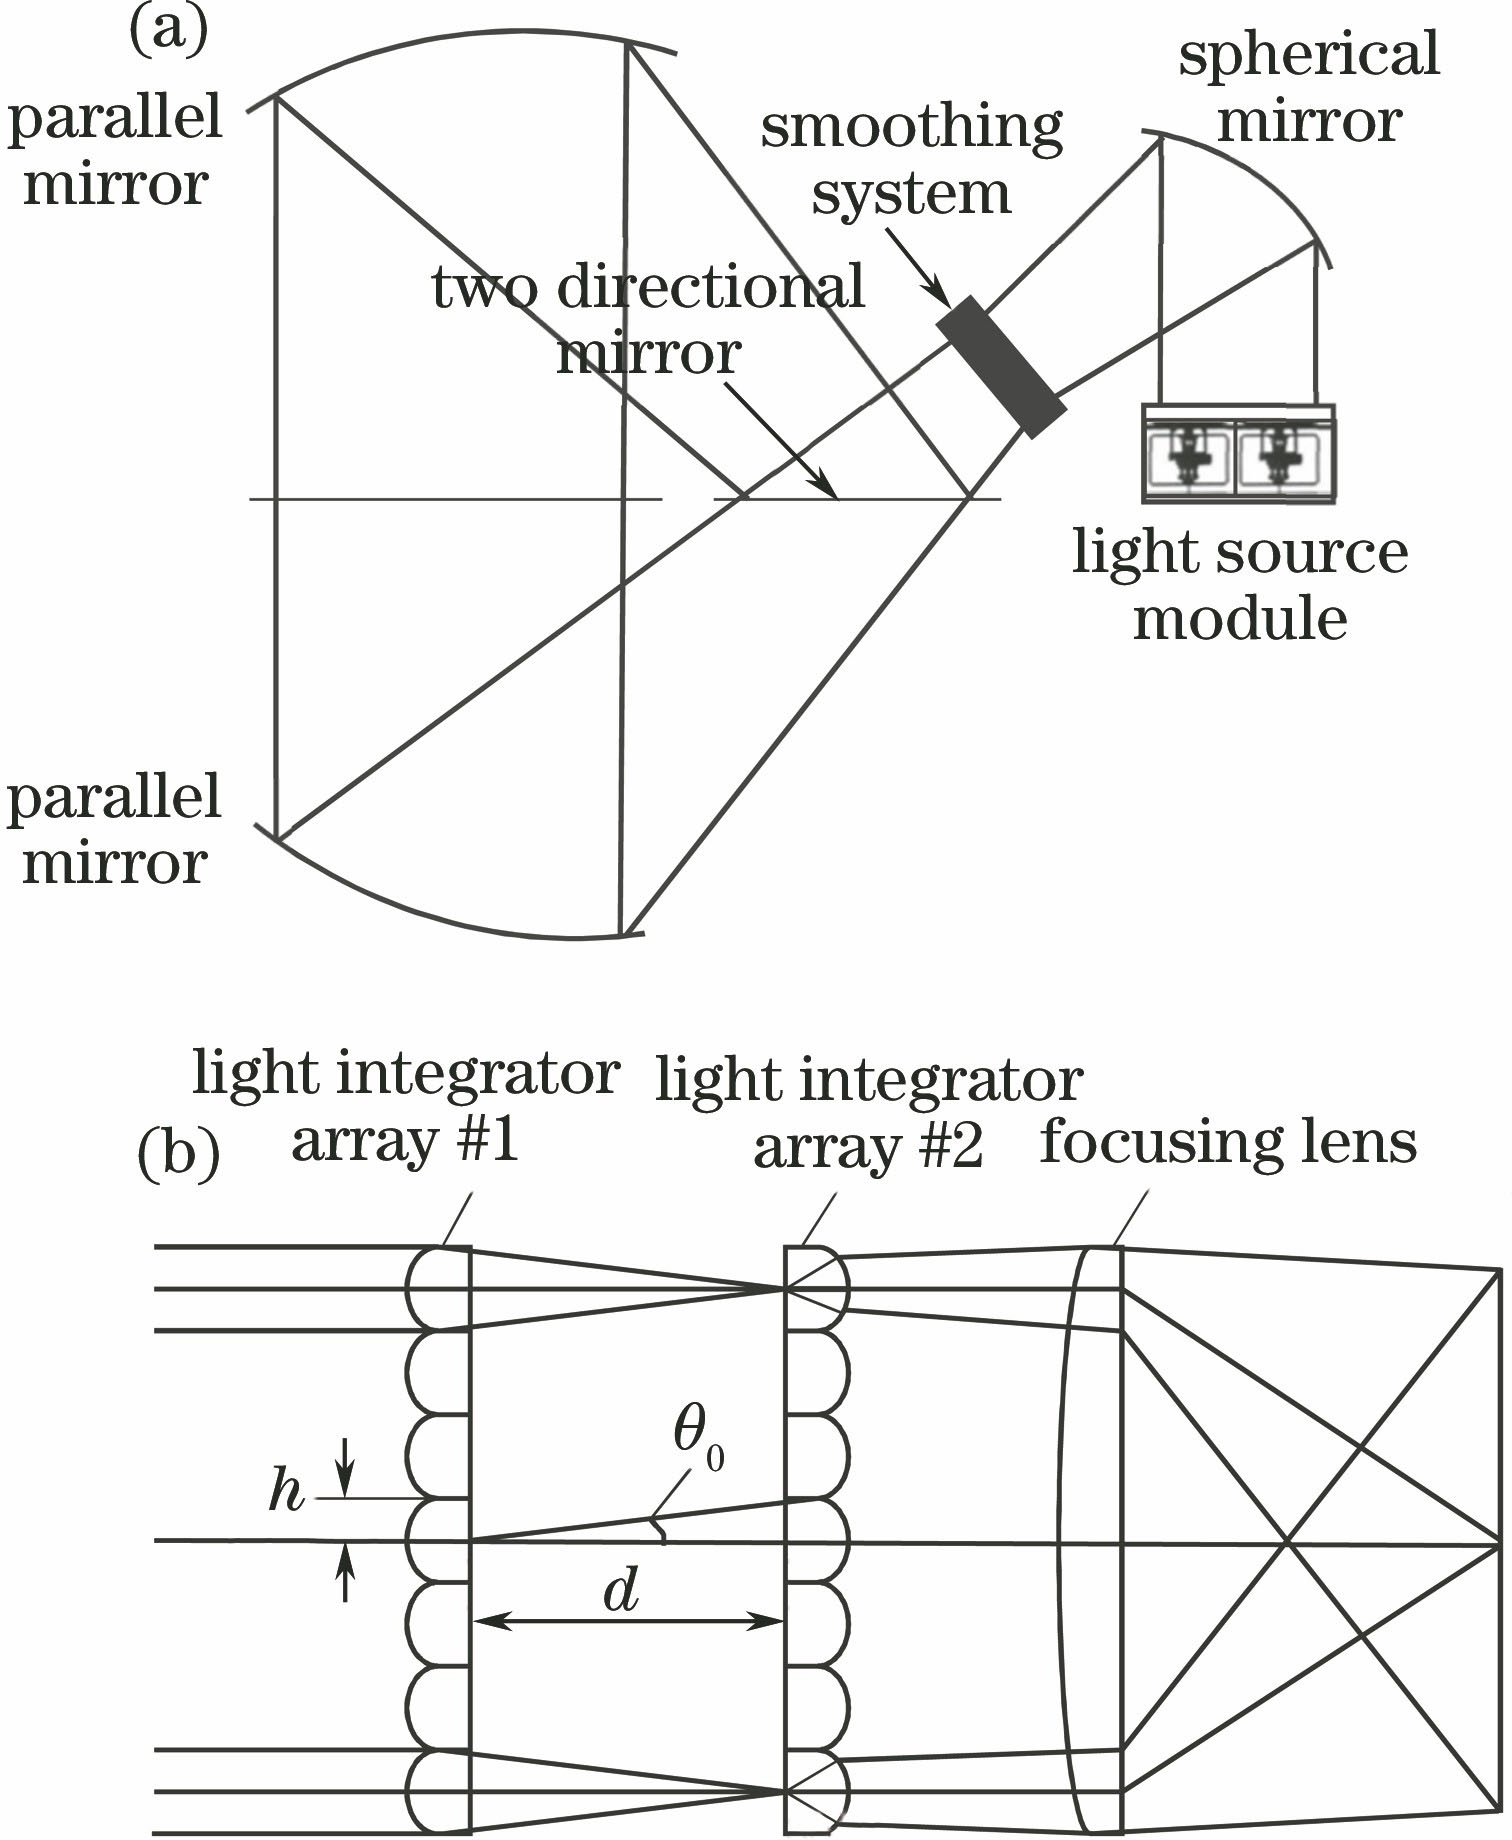 (a) Optical system of exposure machine; (b) smoothing principle of fly-eye lens